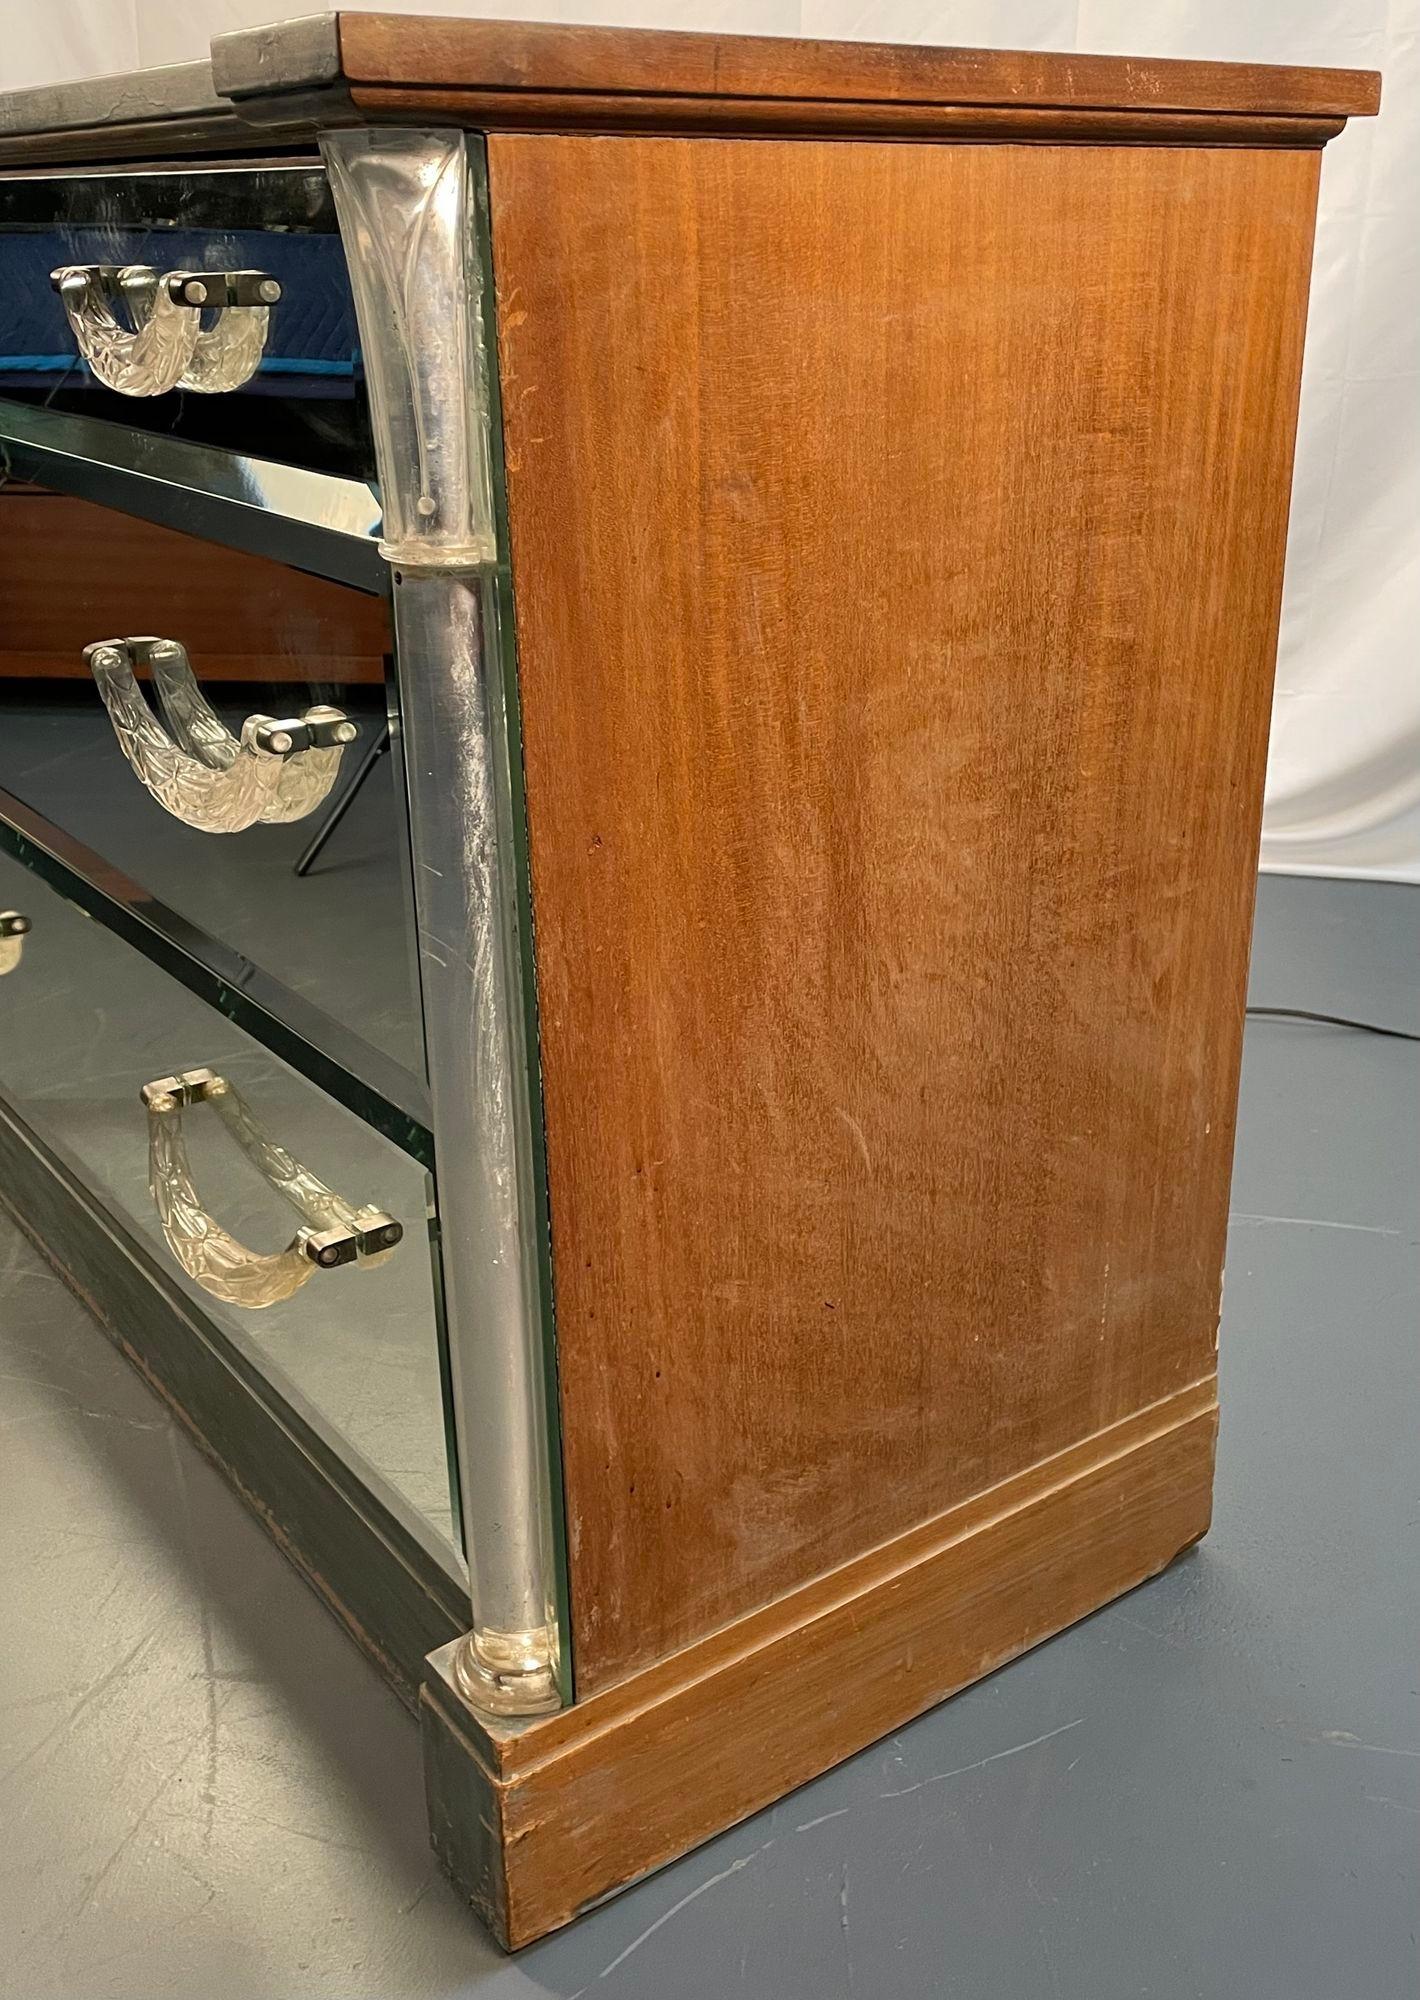 Grosfeld House, Mid-Century Modern, Glassics Series, Mirrored Cabinet, 1930s For Sale 9